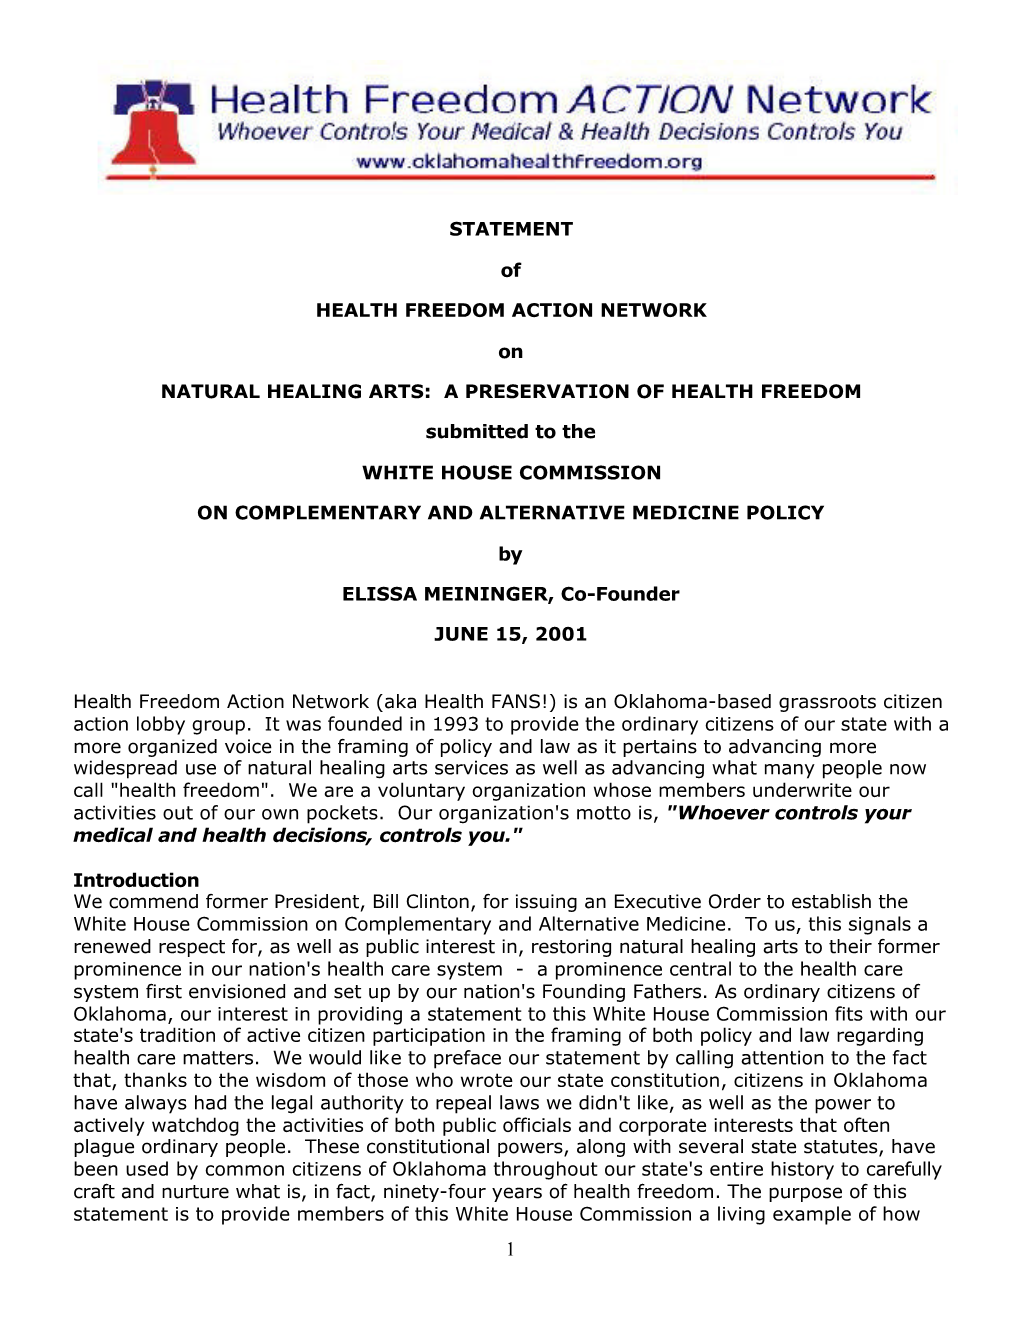 STATEMENT of HEALTH FREEDOM ACTION NETWORK on NATURAL